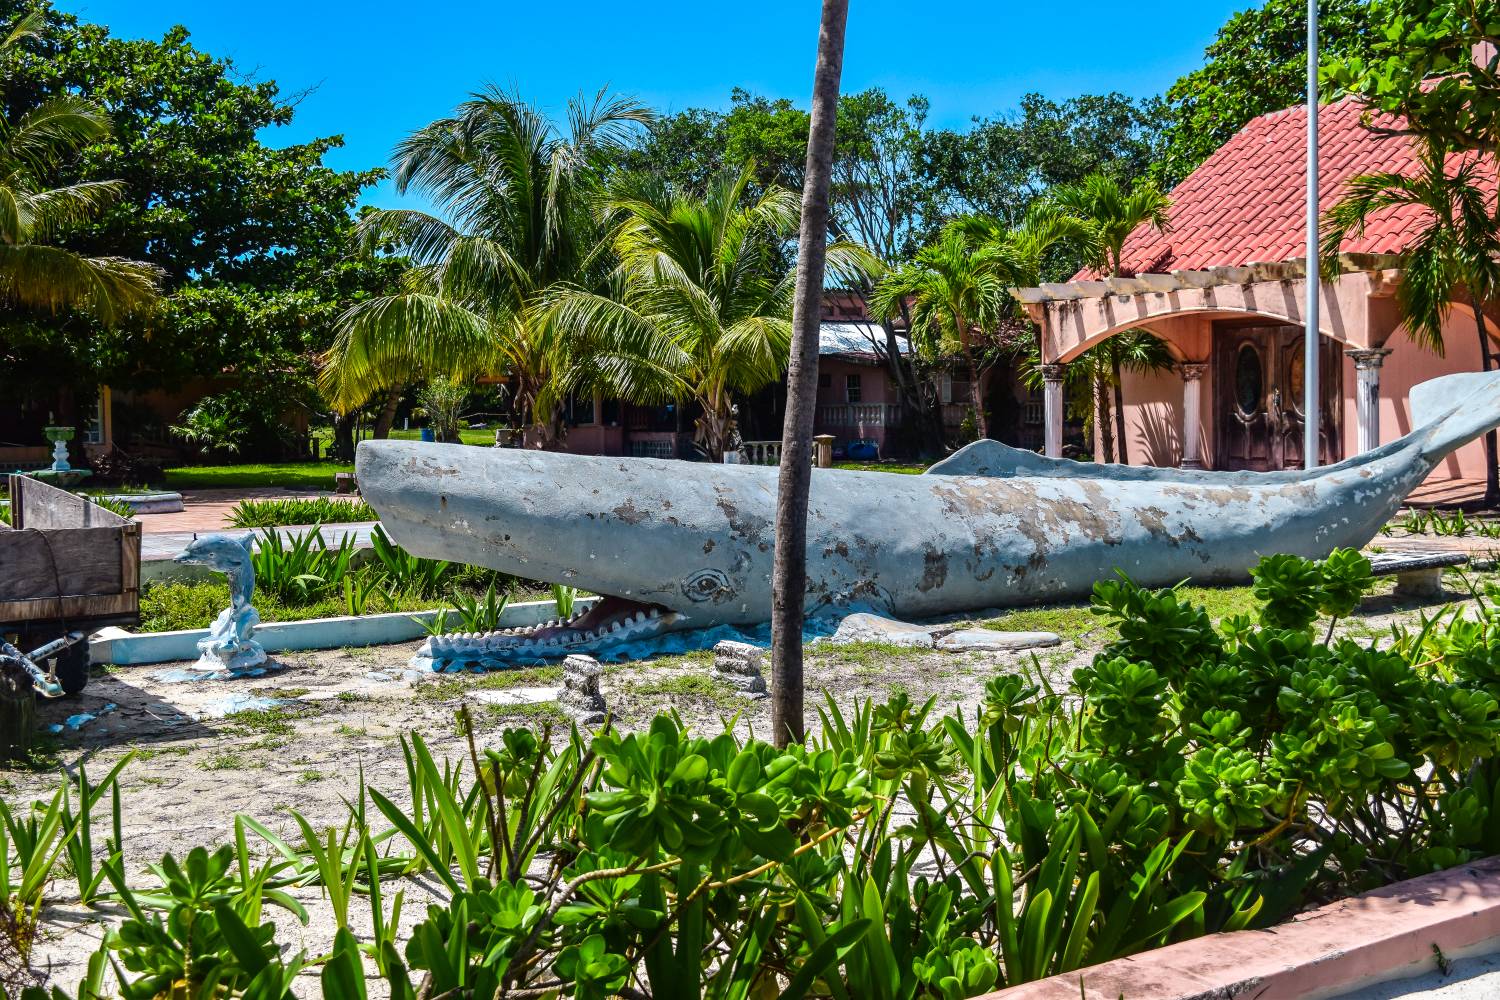 The Most Fascinating, Abandoned Property On Ambergris Caye, Belize - Essene Way